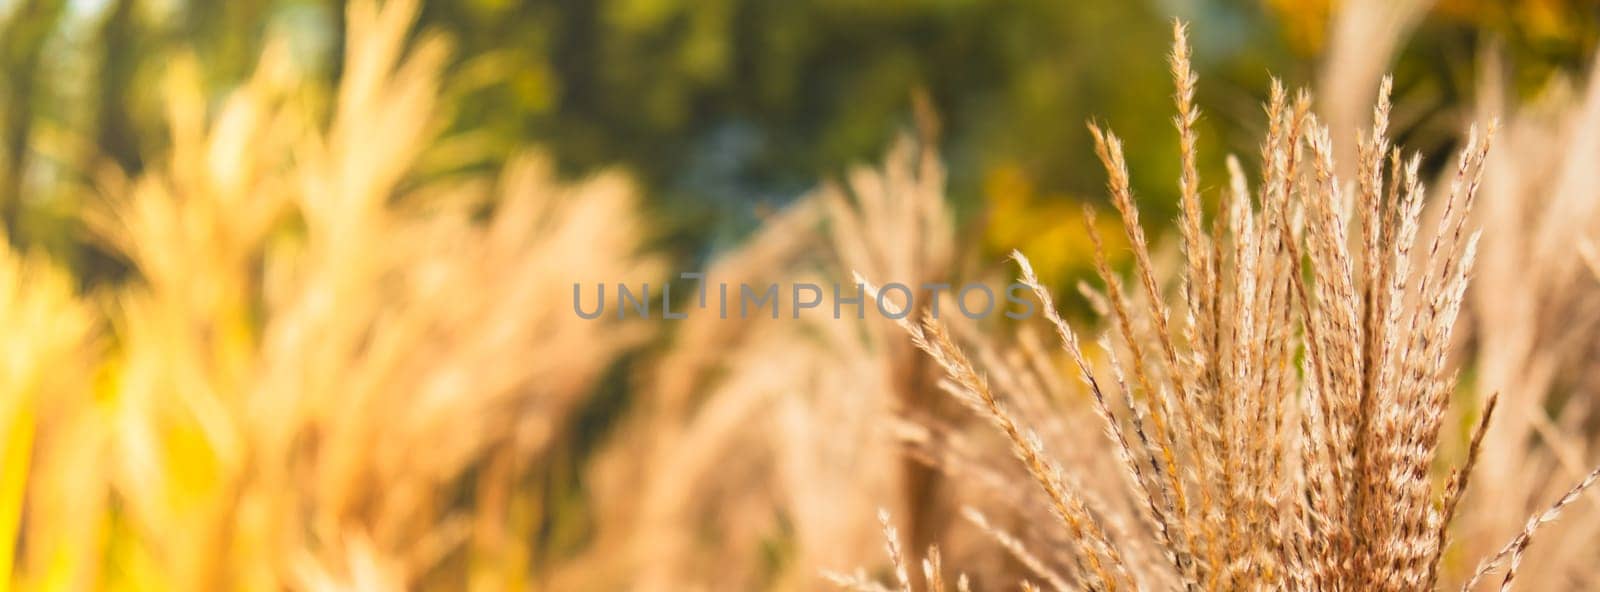 Silver grass flower blowing in the wind. Beautiful spring tall grass flower swaying by blowing wind outdoors. Silver or gold reed grass. Abstract natural 4k video background earth tones